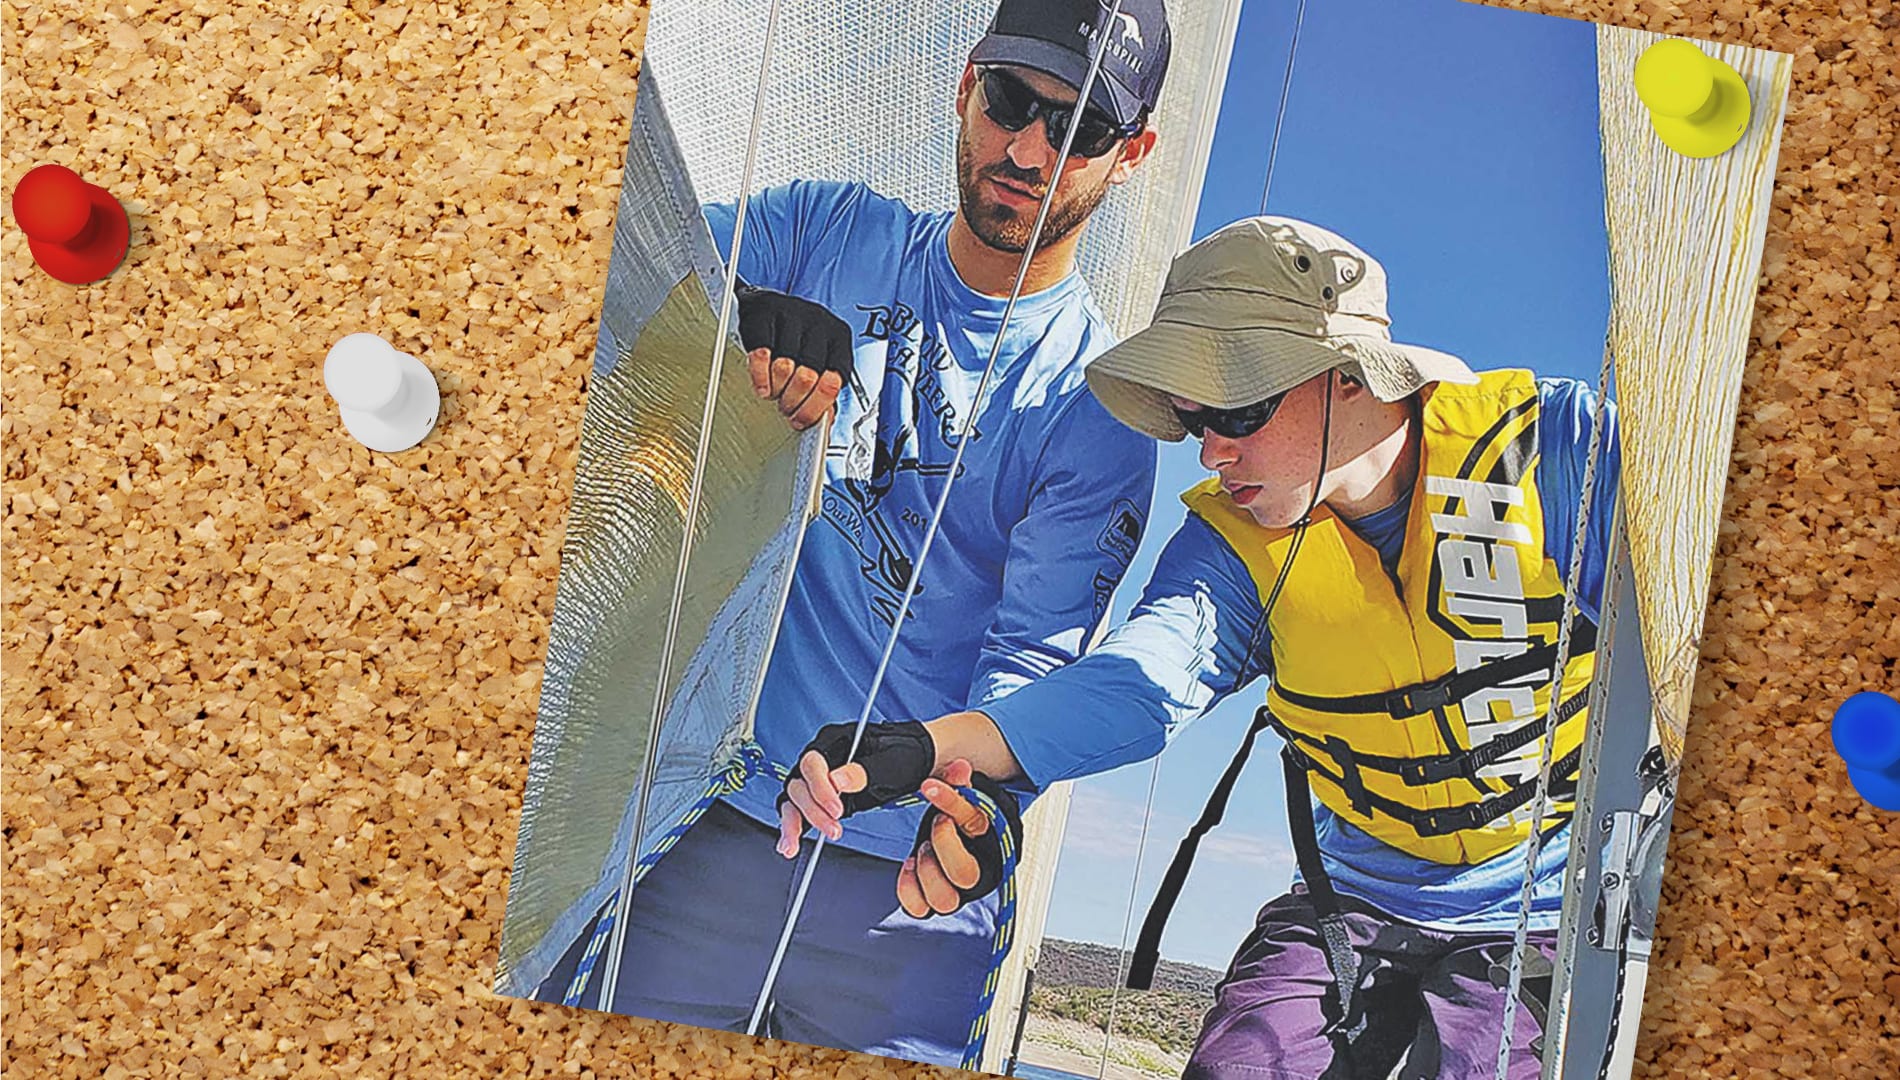 photo pinned to a cork board. photo shows a man in a hat and sunglasses hellping a boy in a lifejacket on a sail boat.